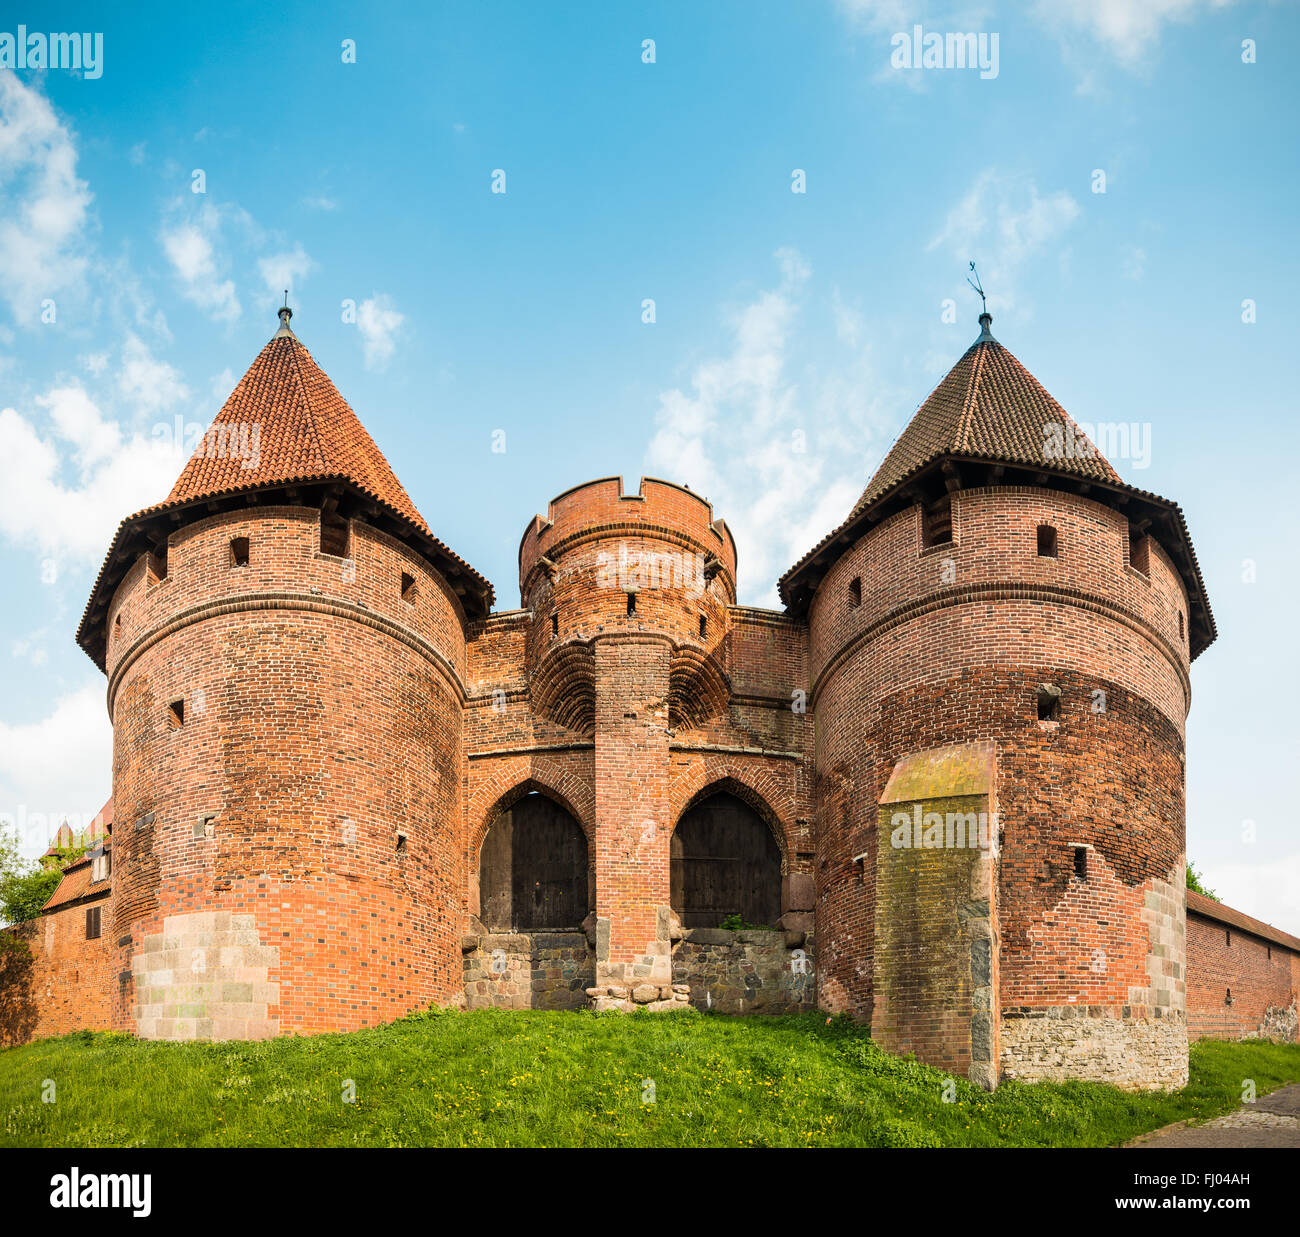 Teutonic Castle in Malbork (Marienburg) in Pomerania, Poland, Europe. UNESCO world heritage site. Blue sky with clouds in backgr Stock Photo